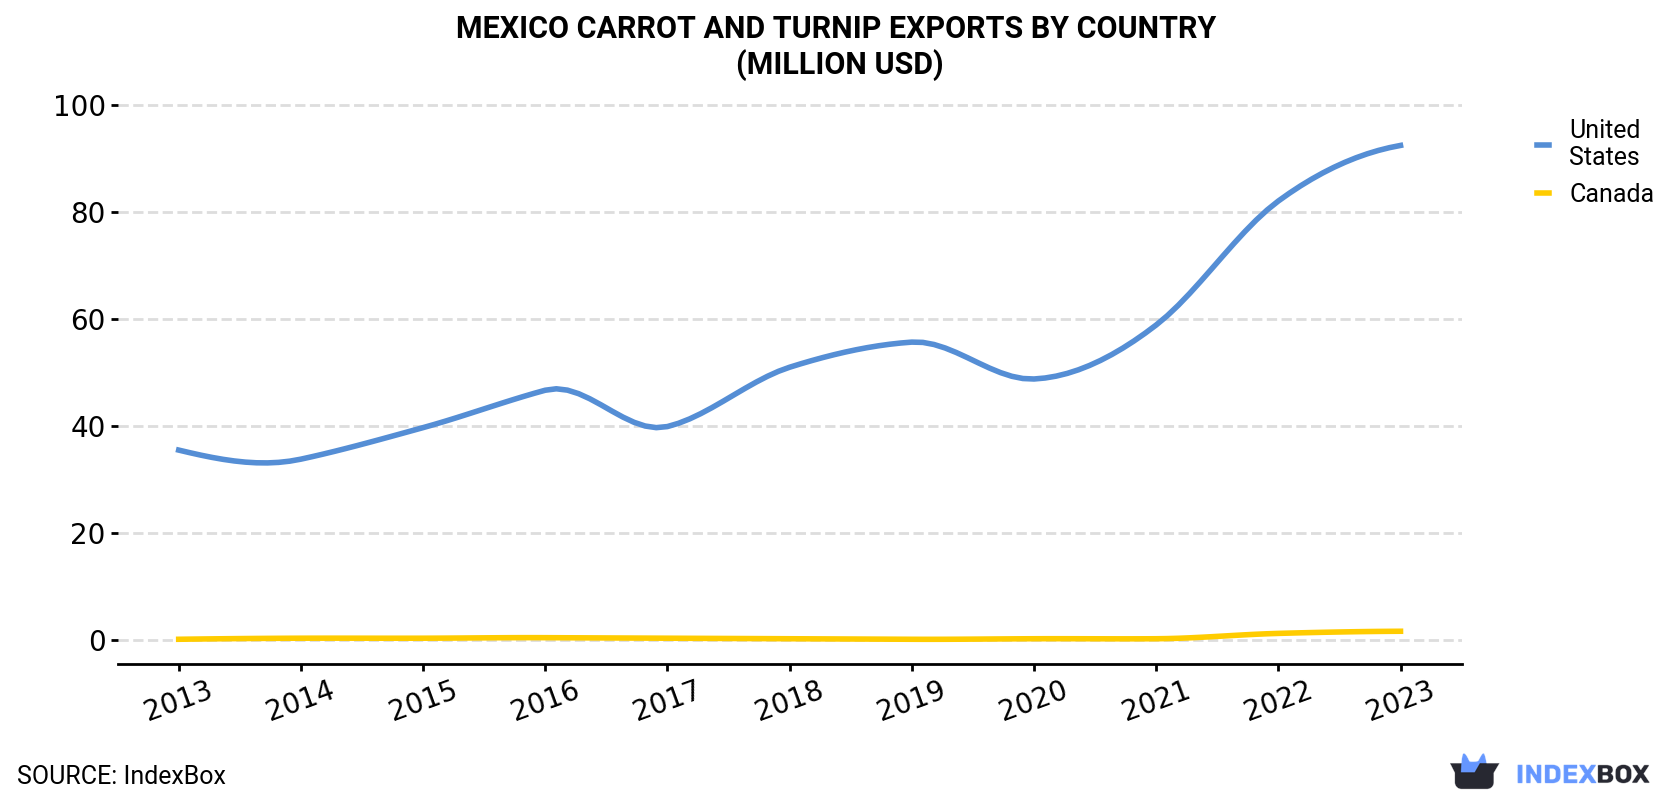 Mexico Carrot And Turnip Exports By Country (Million USD)